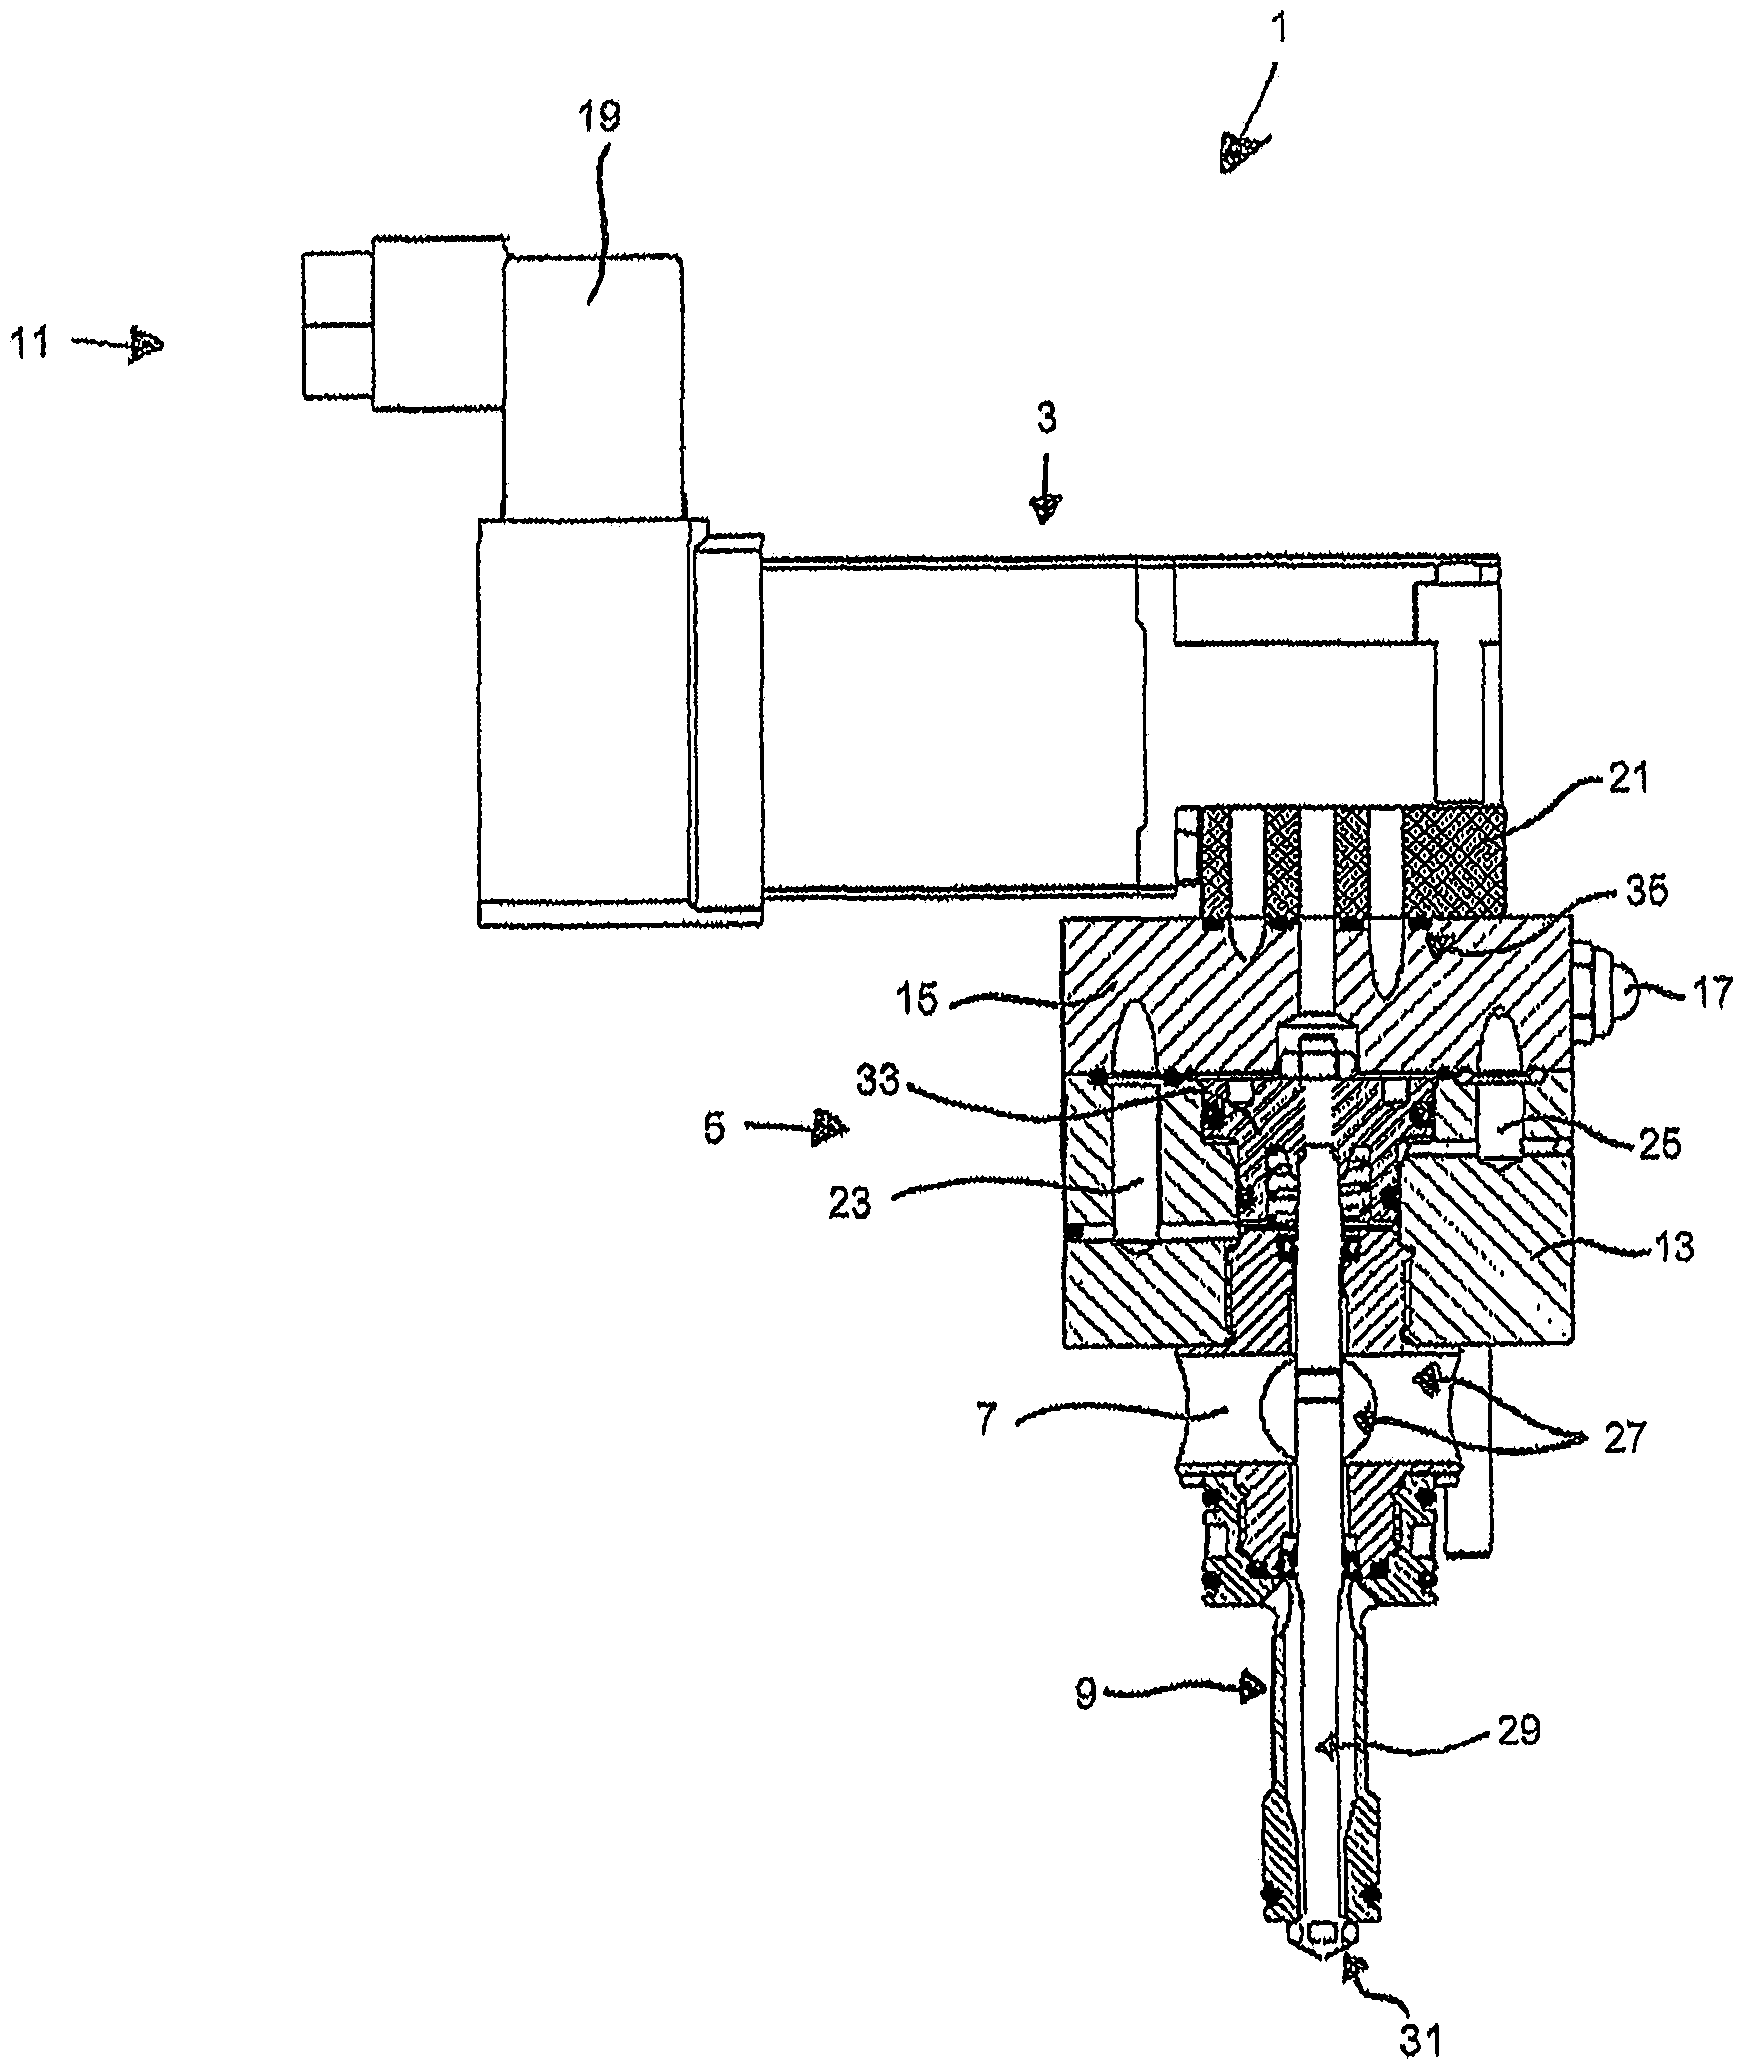 Dispensing module, applicator head and nozzle holder for dispensing a fluid, in particular hot-melt adhesive